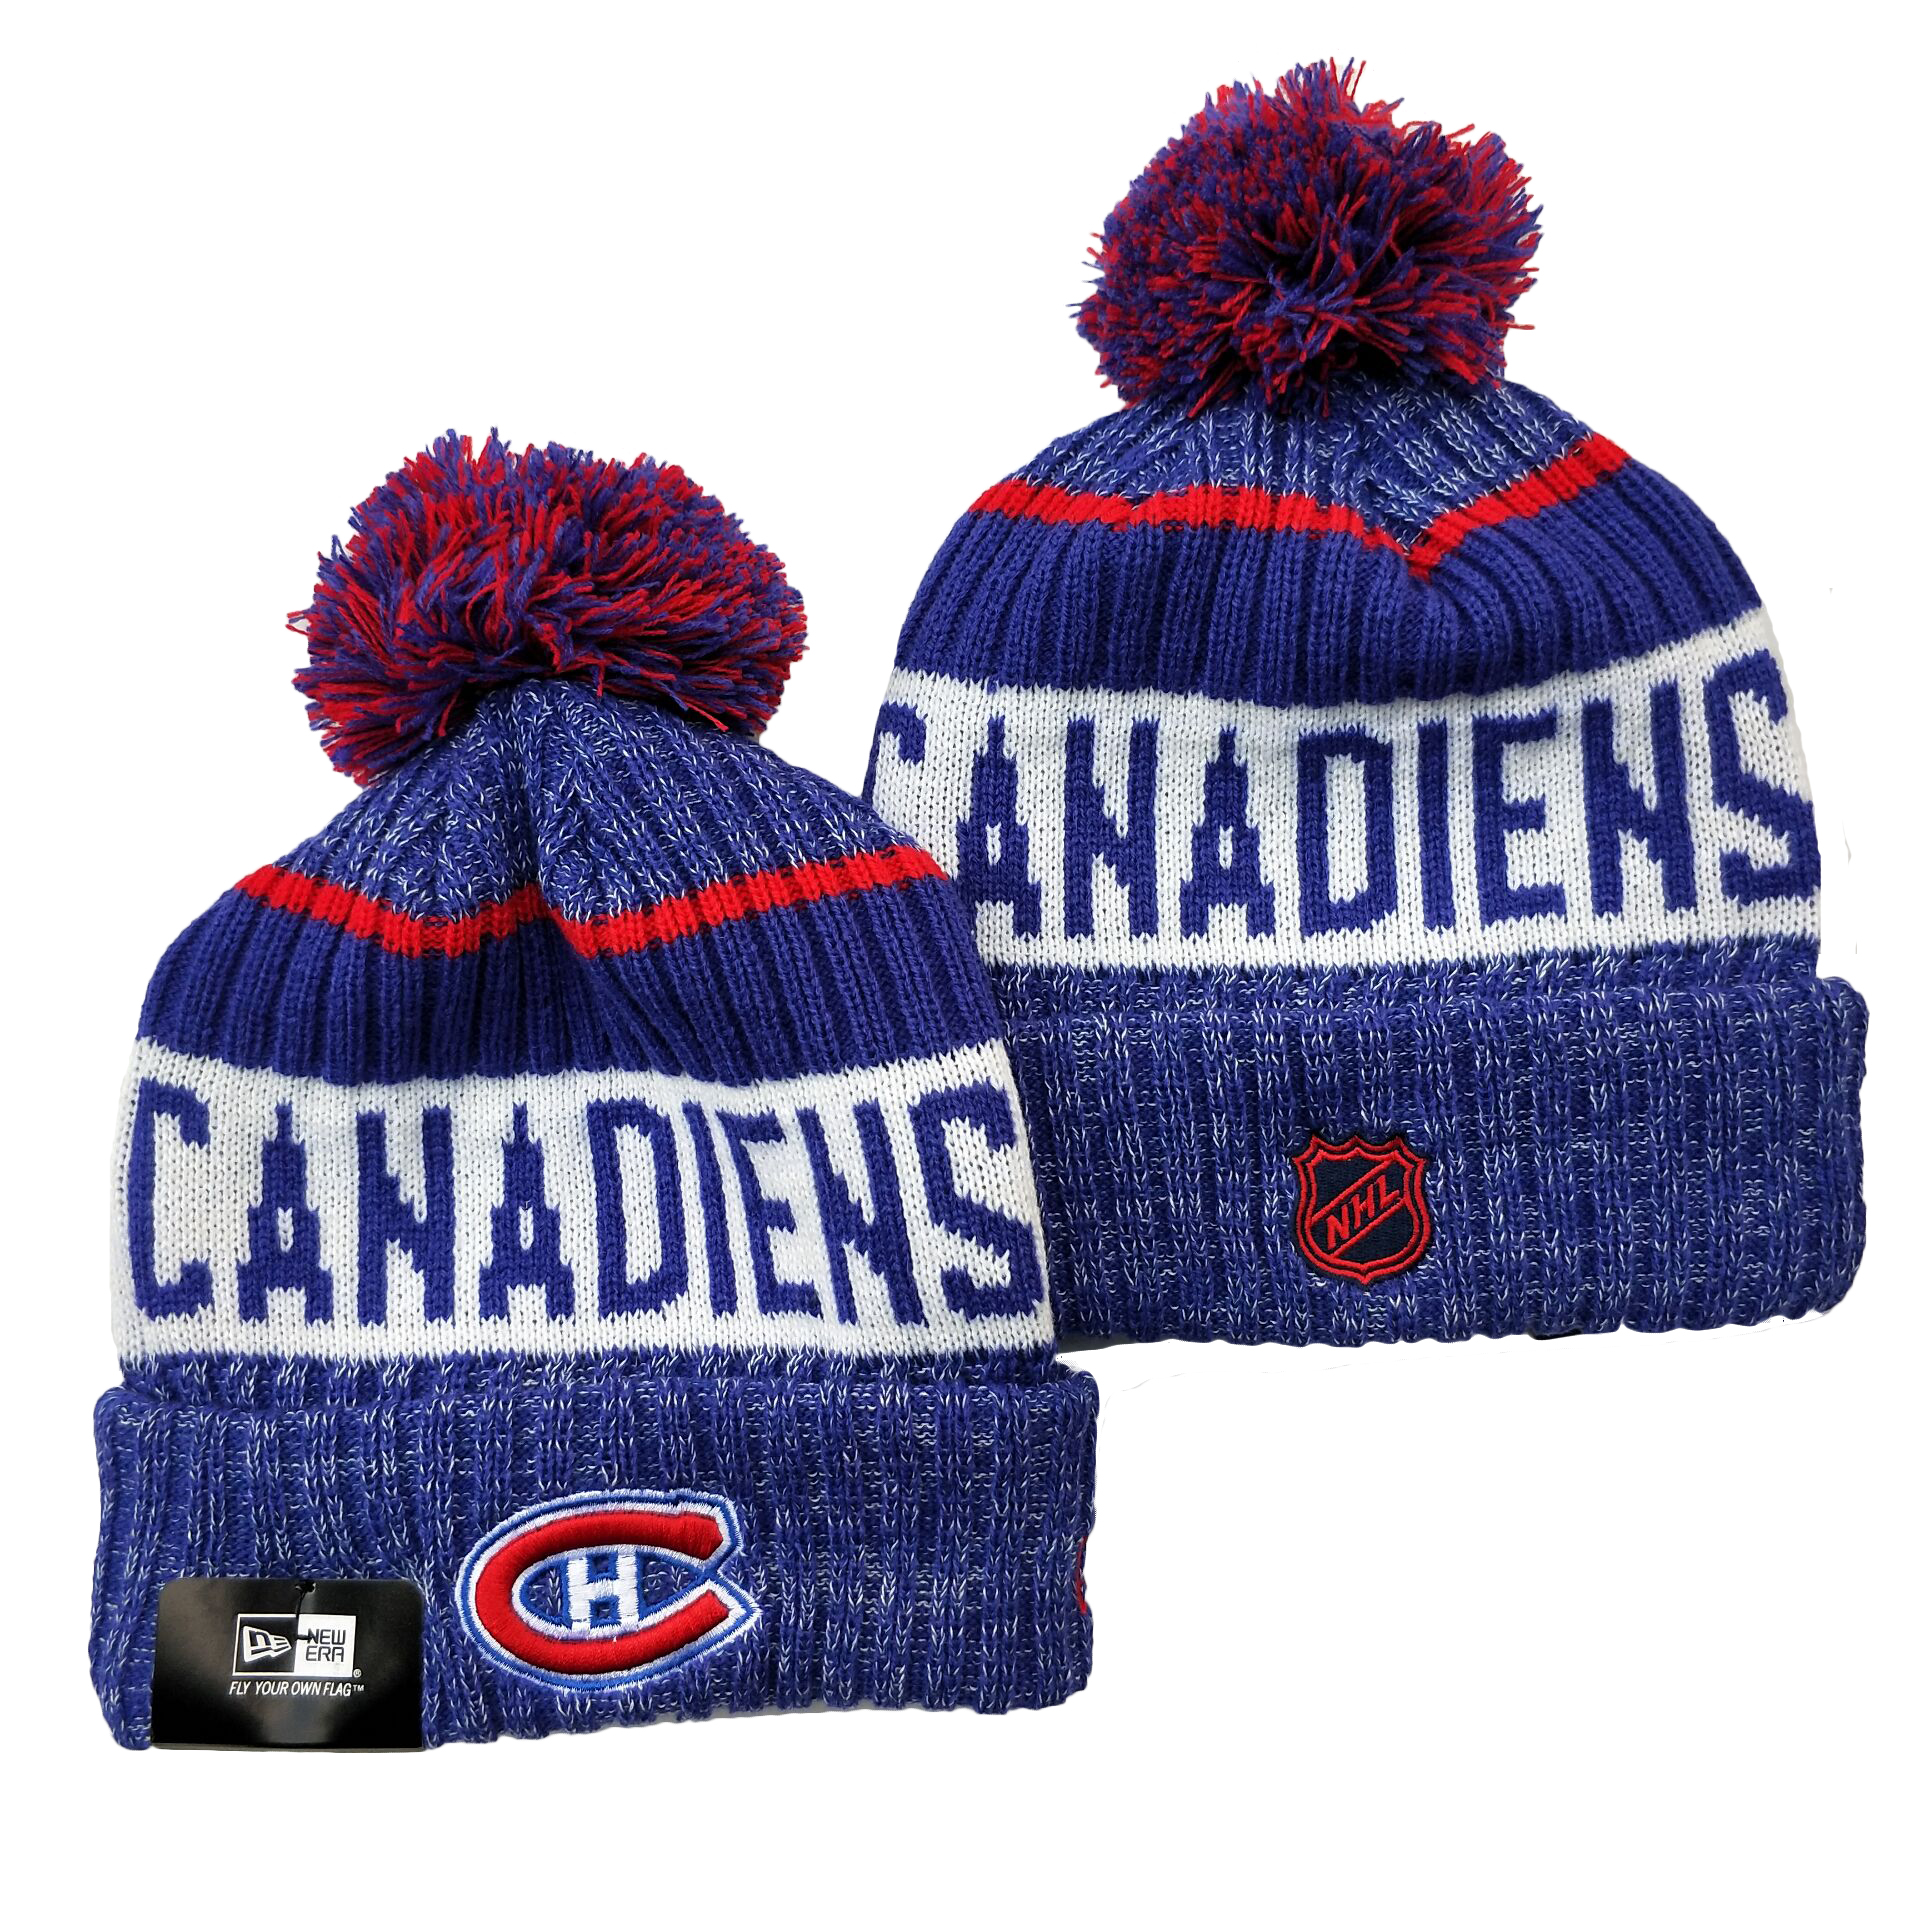 Montreal Canadiens Knit Hats 001